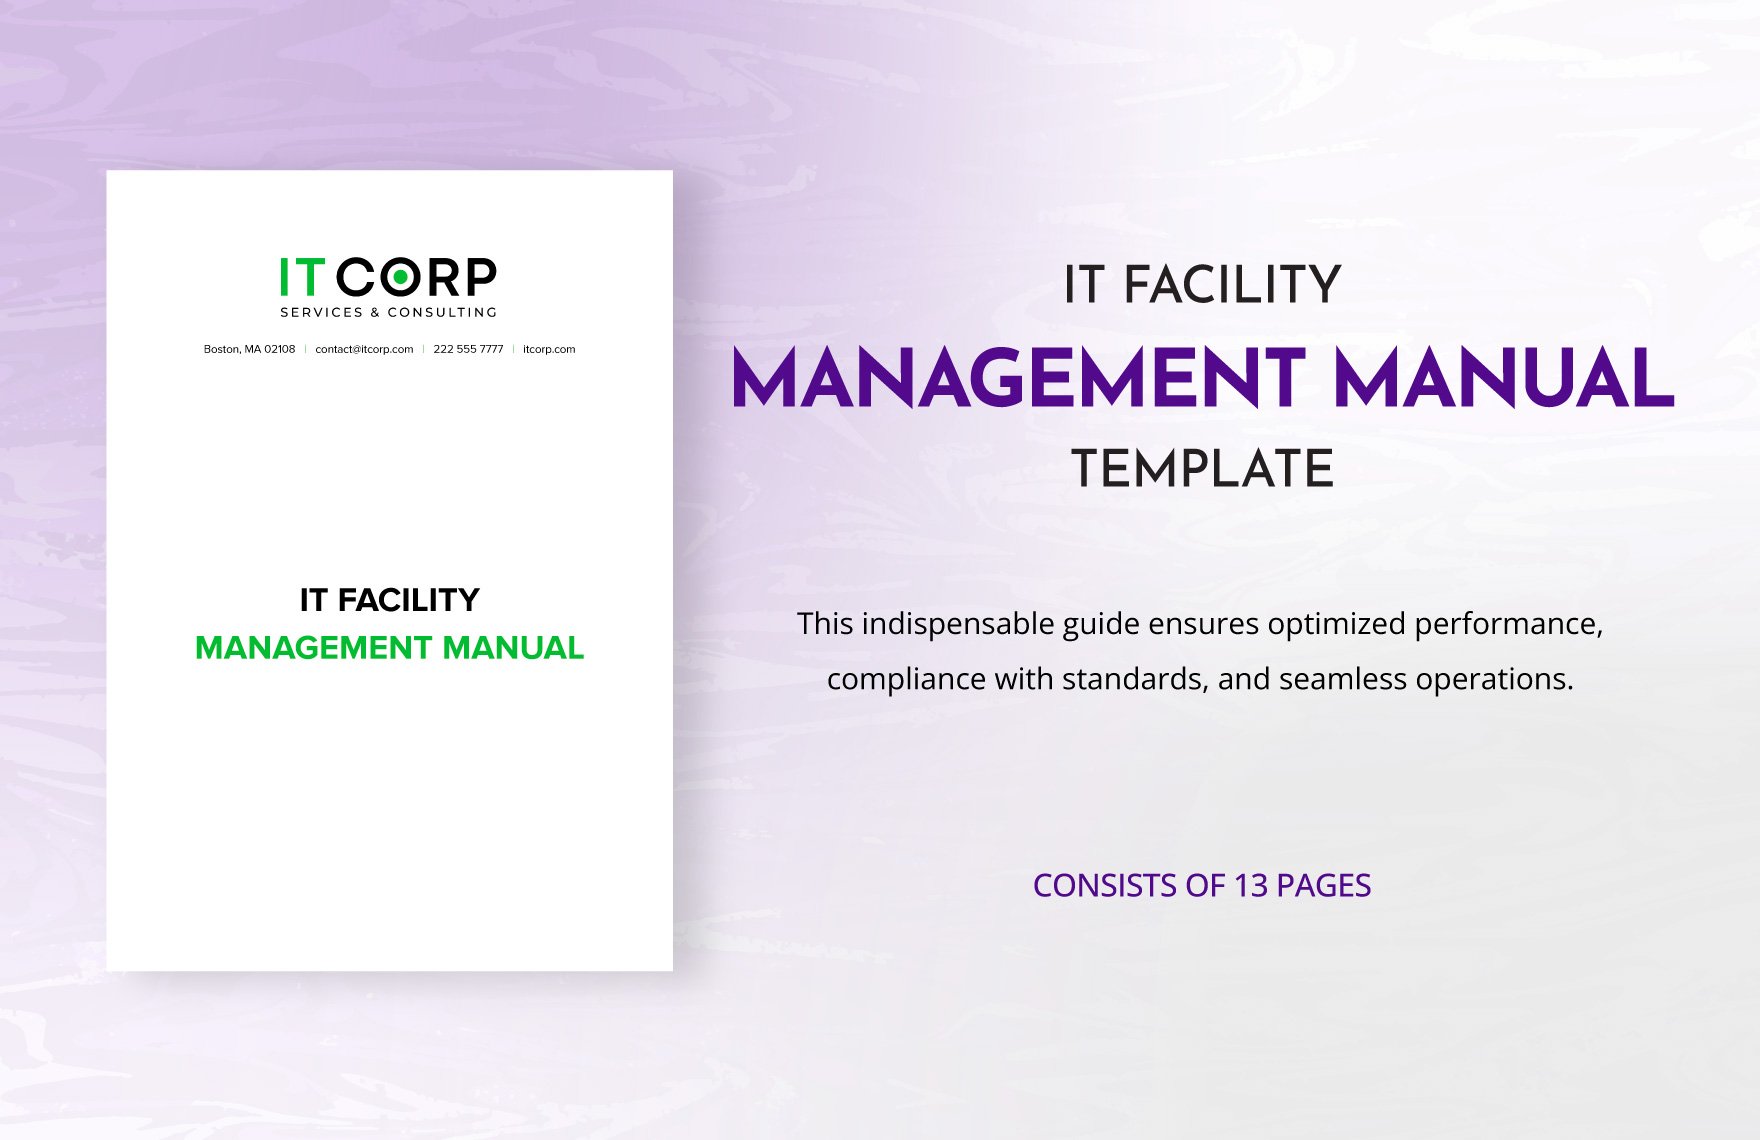 IT Facility Management Manual Template